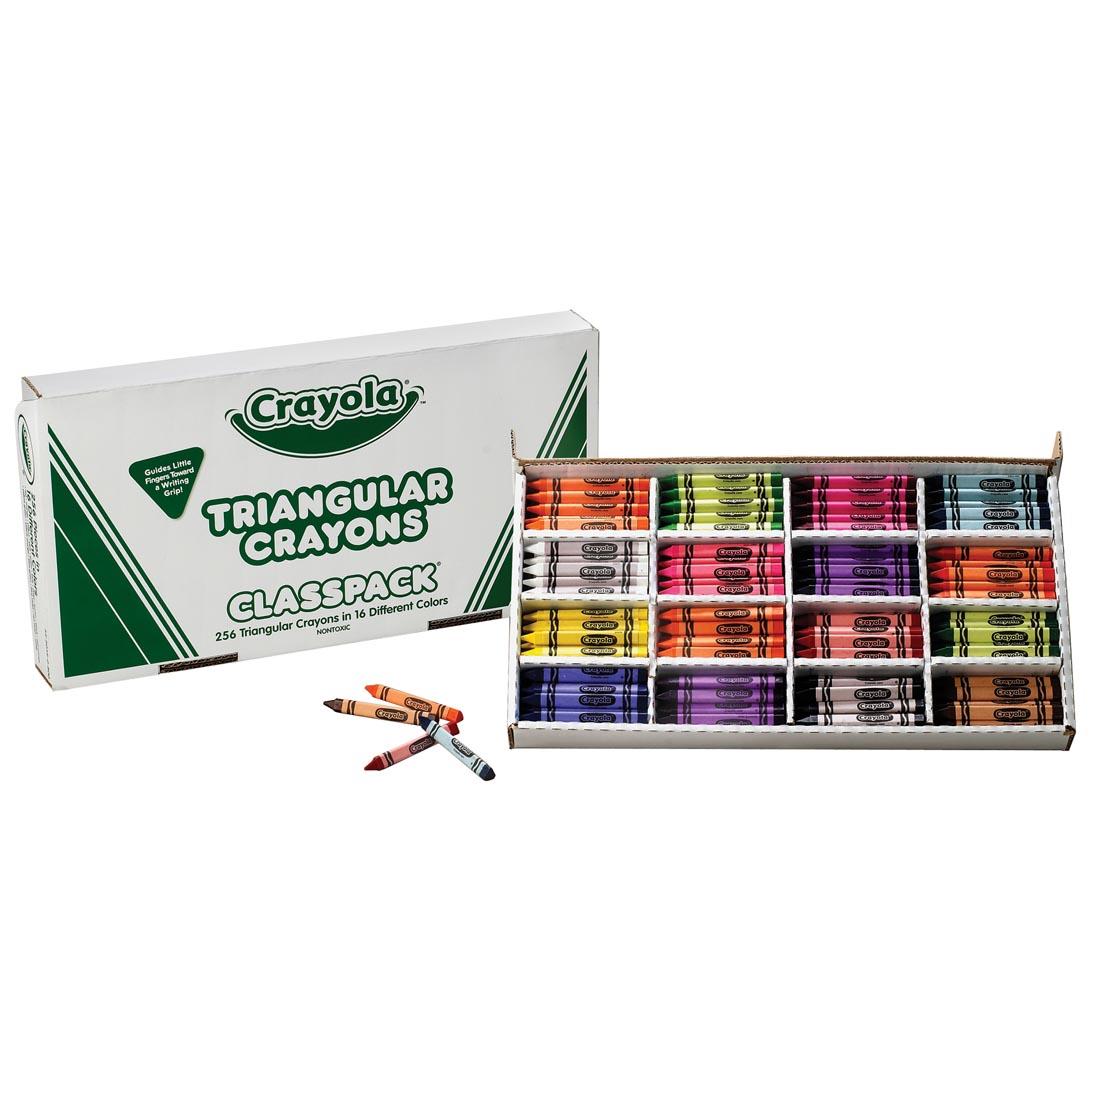 Crayola Triangular Crayons Classpack Box Shown Both Open and Closed